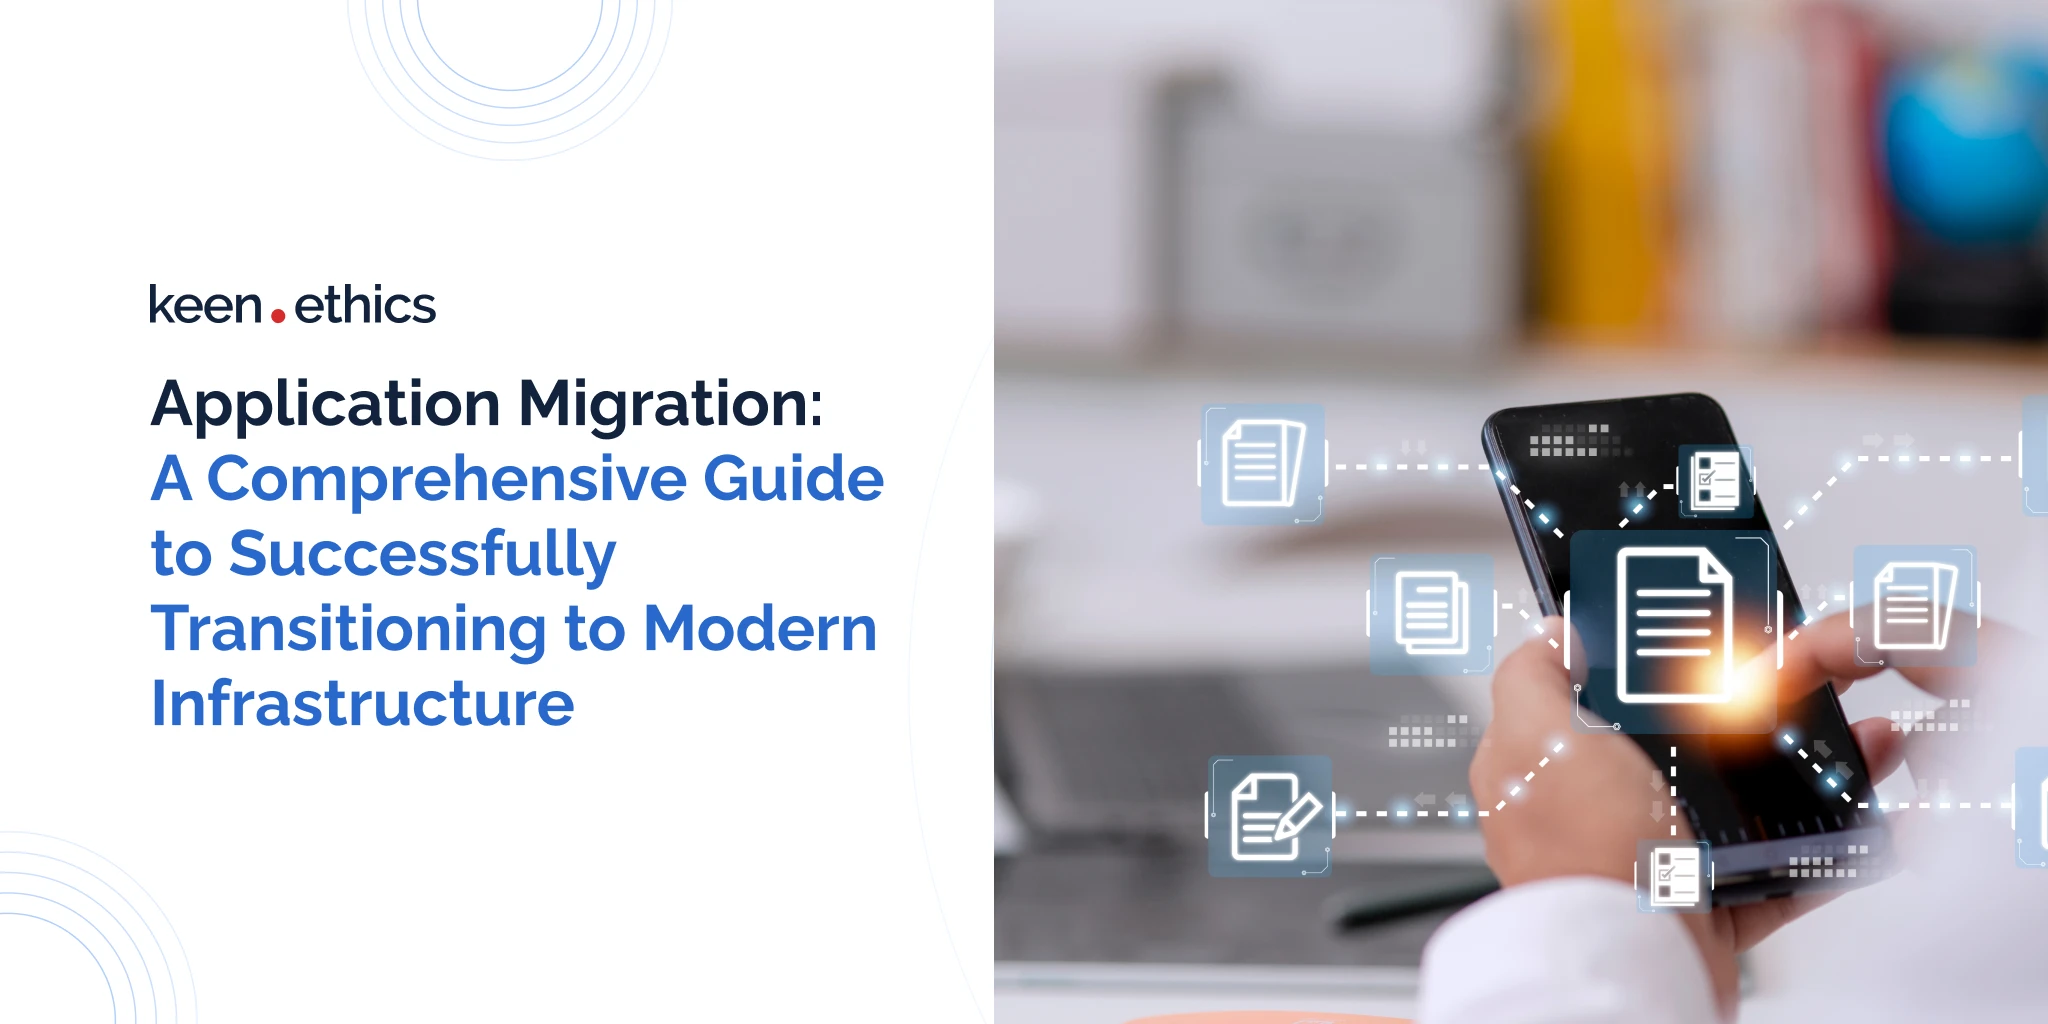 app-migration_-a-comprehensive-guide-to-successfully-transitioning-to-modern-infrasrtrcuture